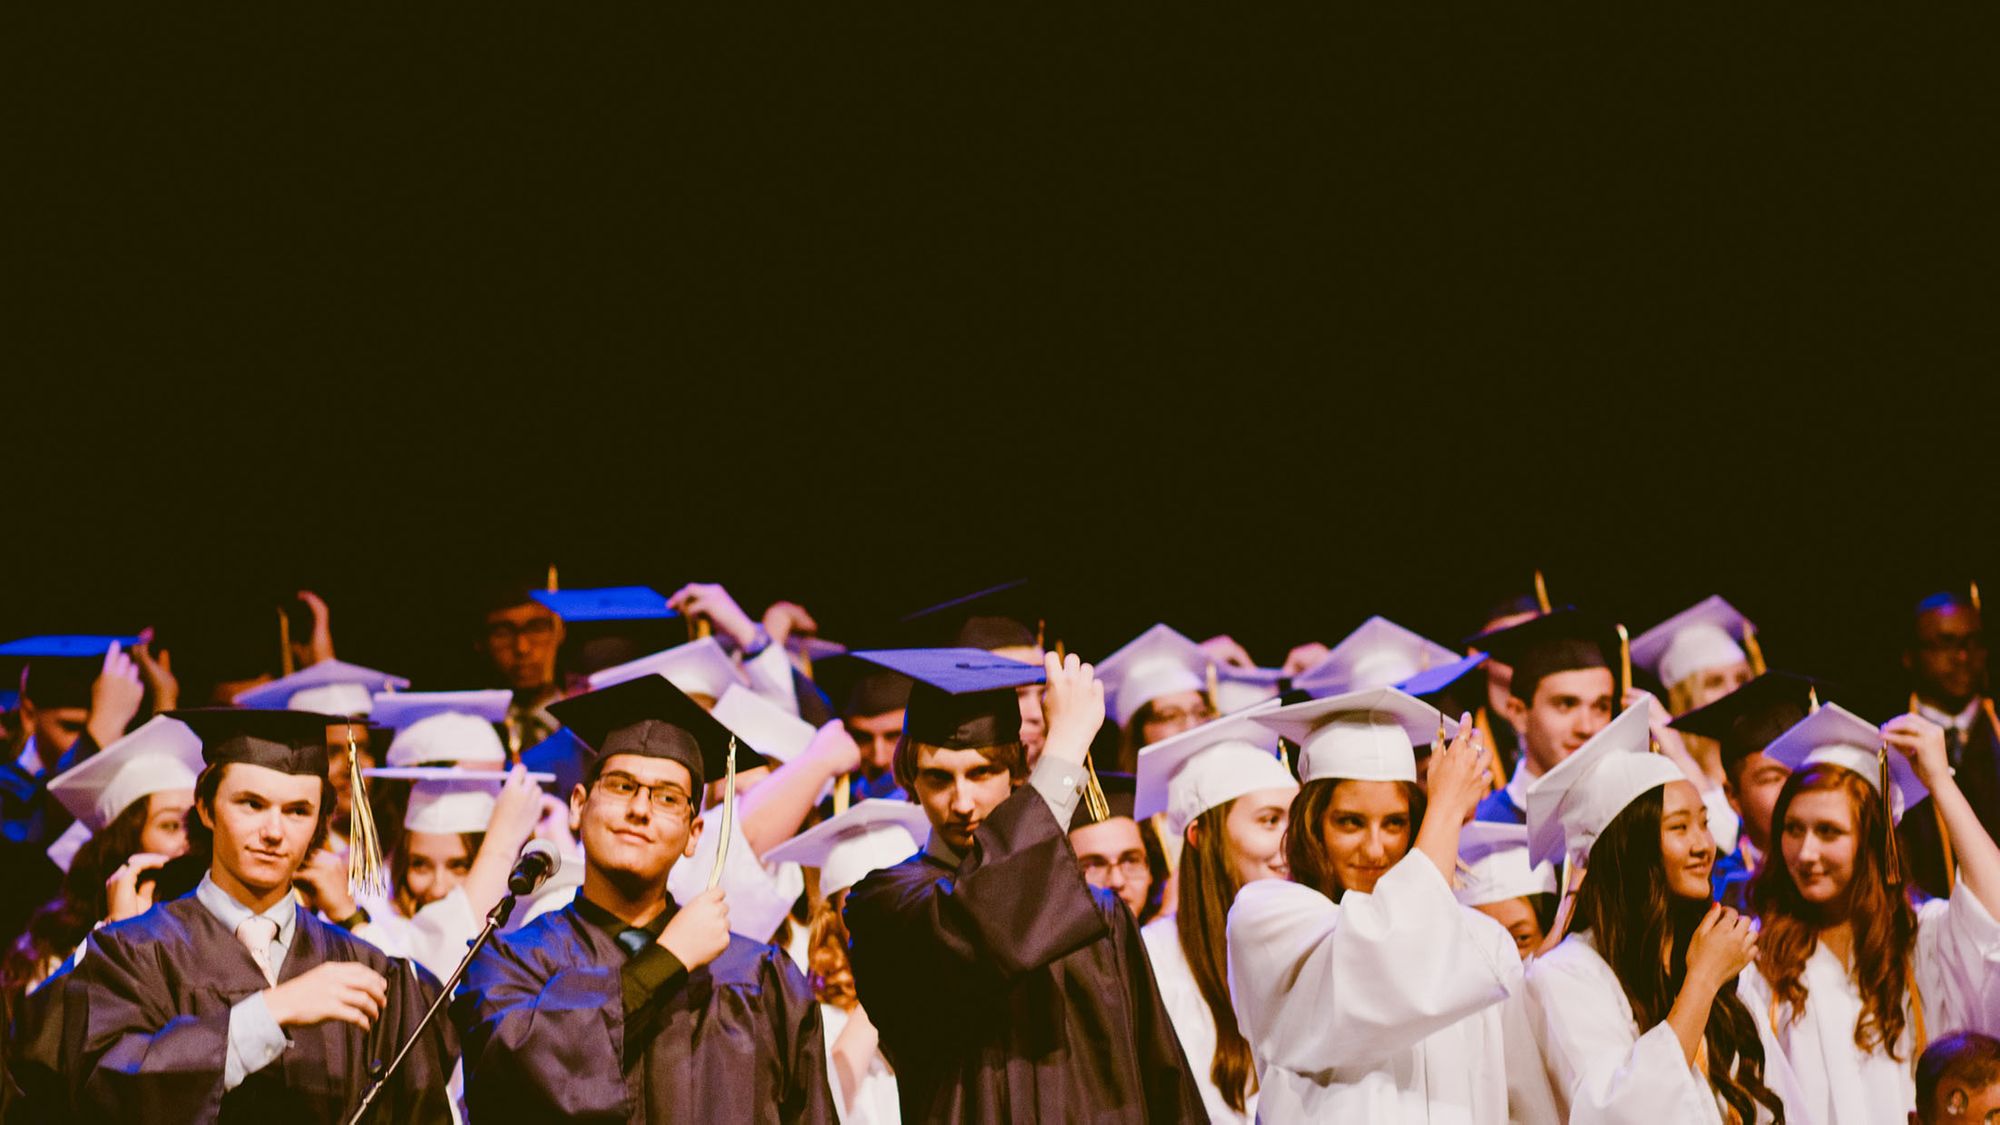 4 Tips For Hiring and Retaining Graduates in 2023